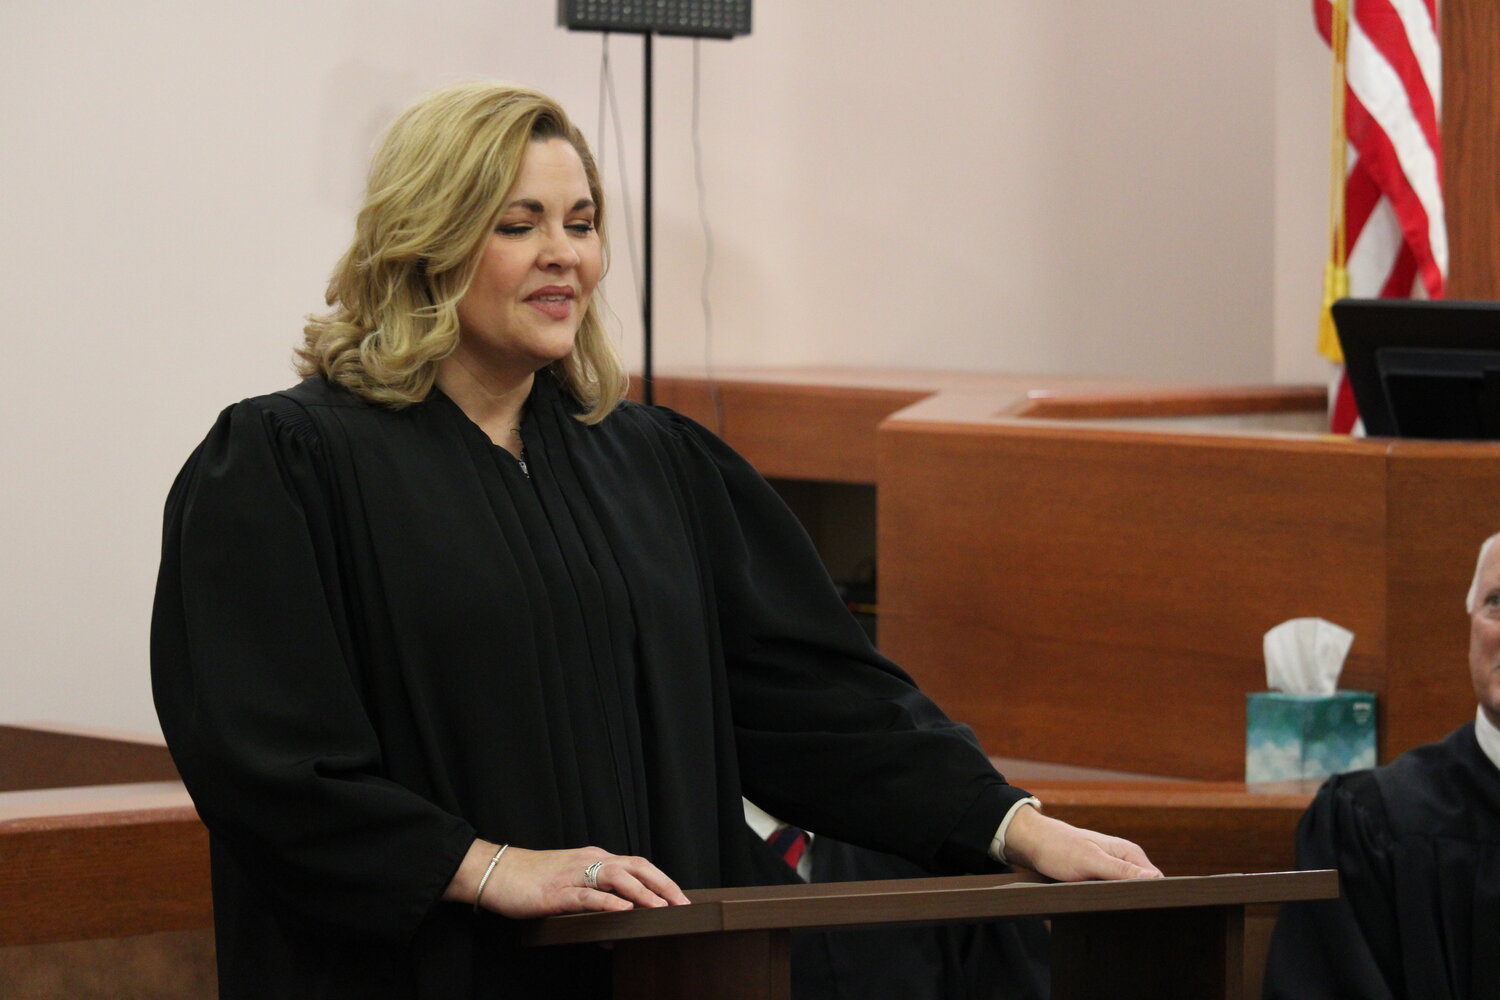 Missouri Supreme Court Justice Kelly Broniec speaks at the beginning of the installation ceremony.